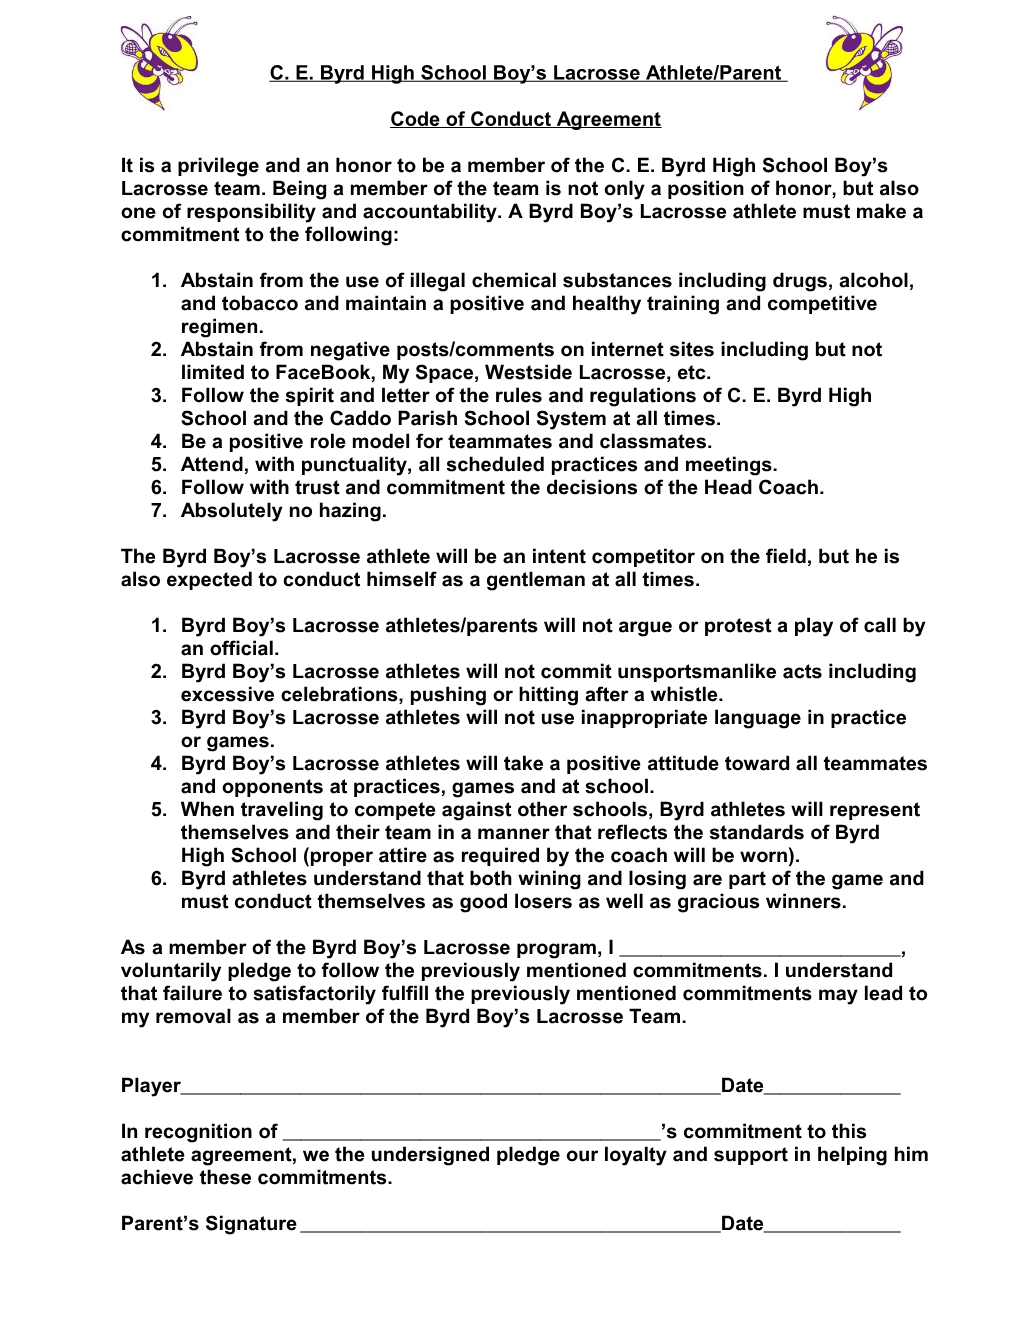 Code of Conduct Agreement